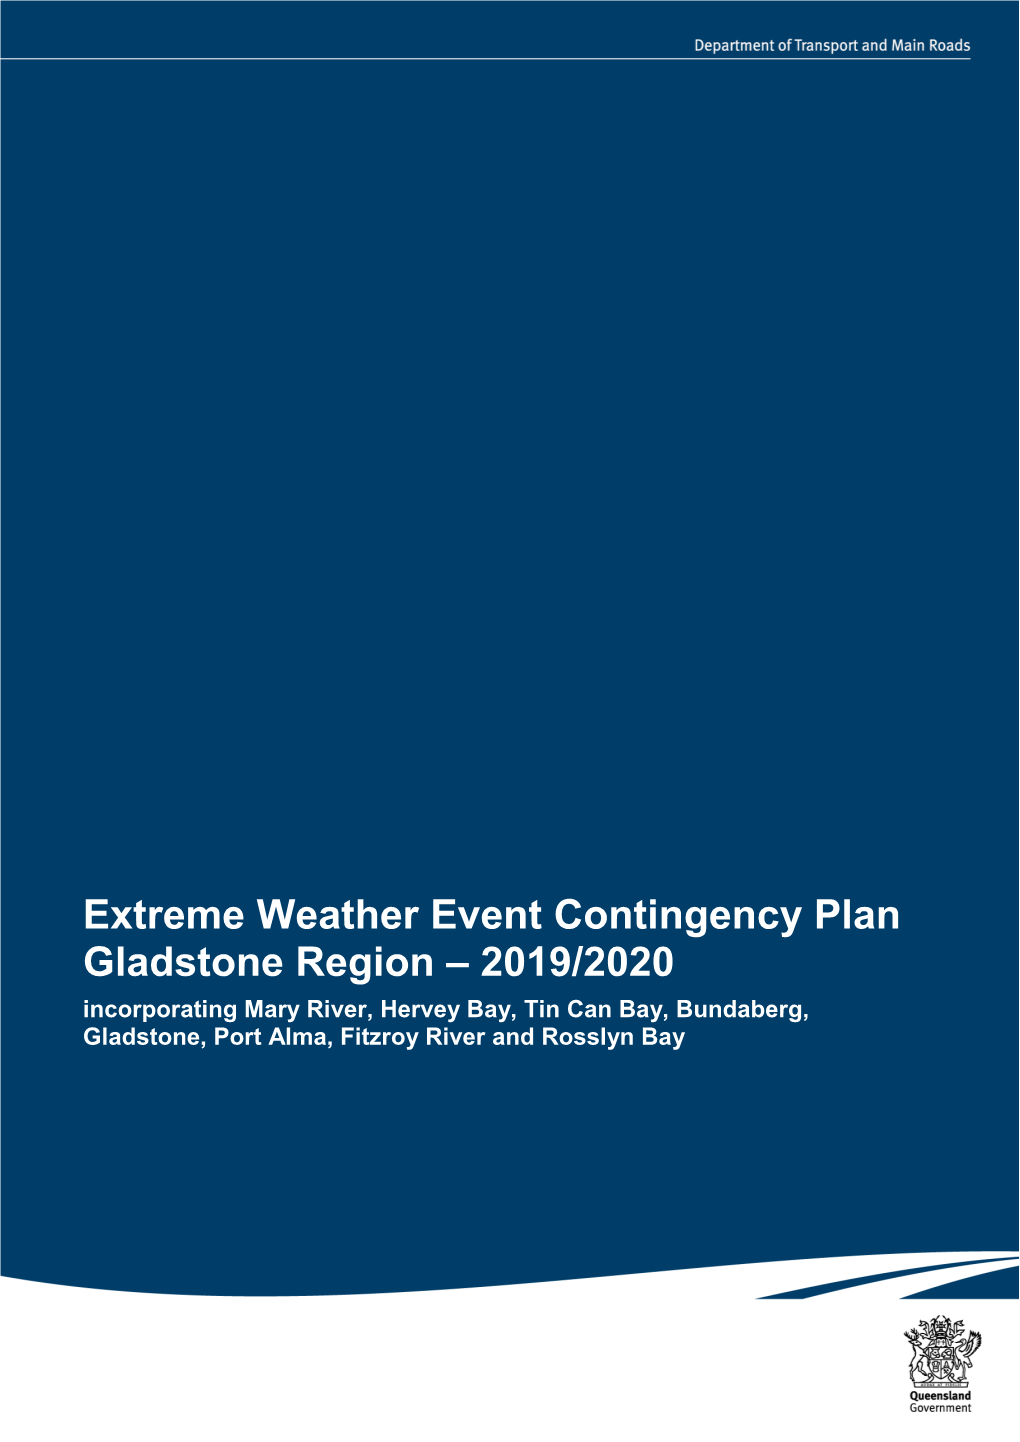 Extreme Weather Event Contingency Plan Gladstone Region – 2019/2020